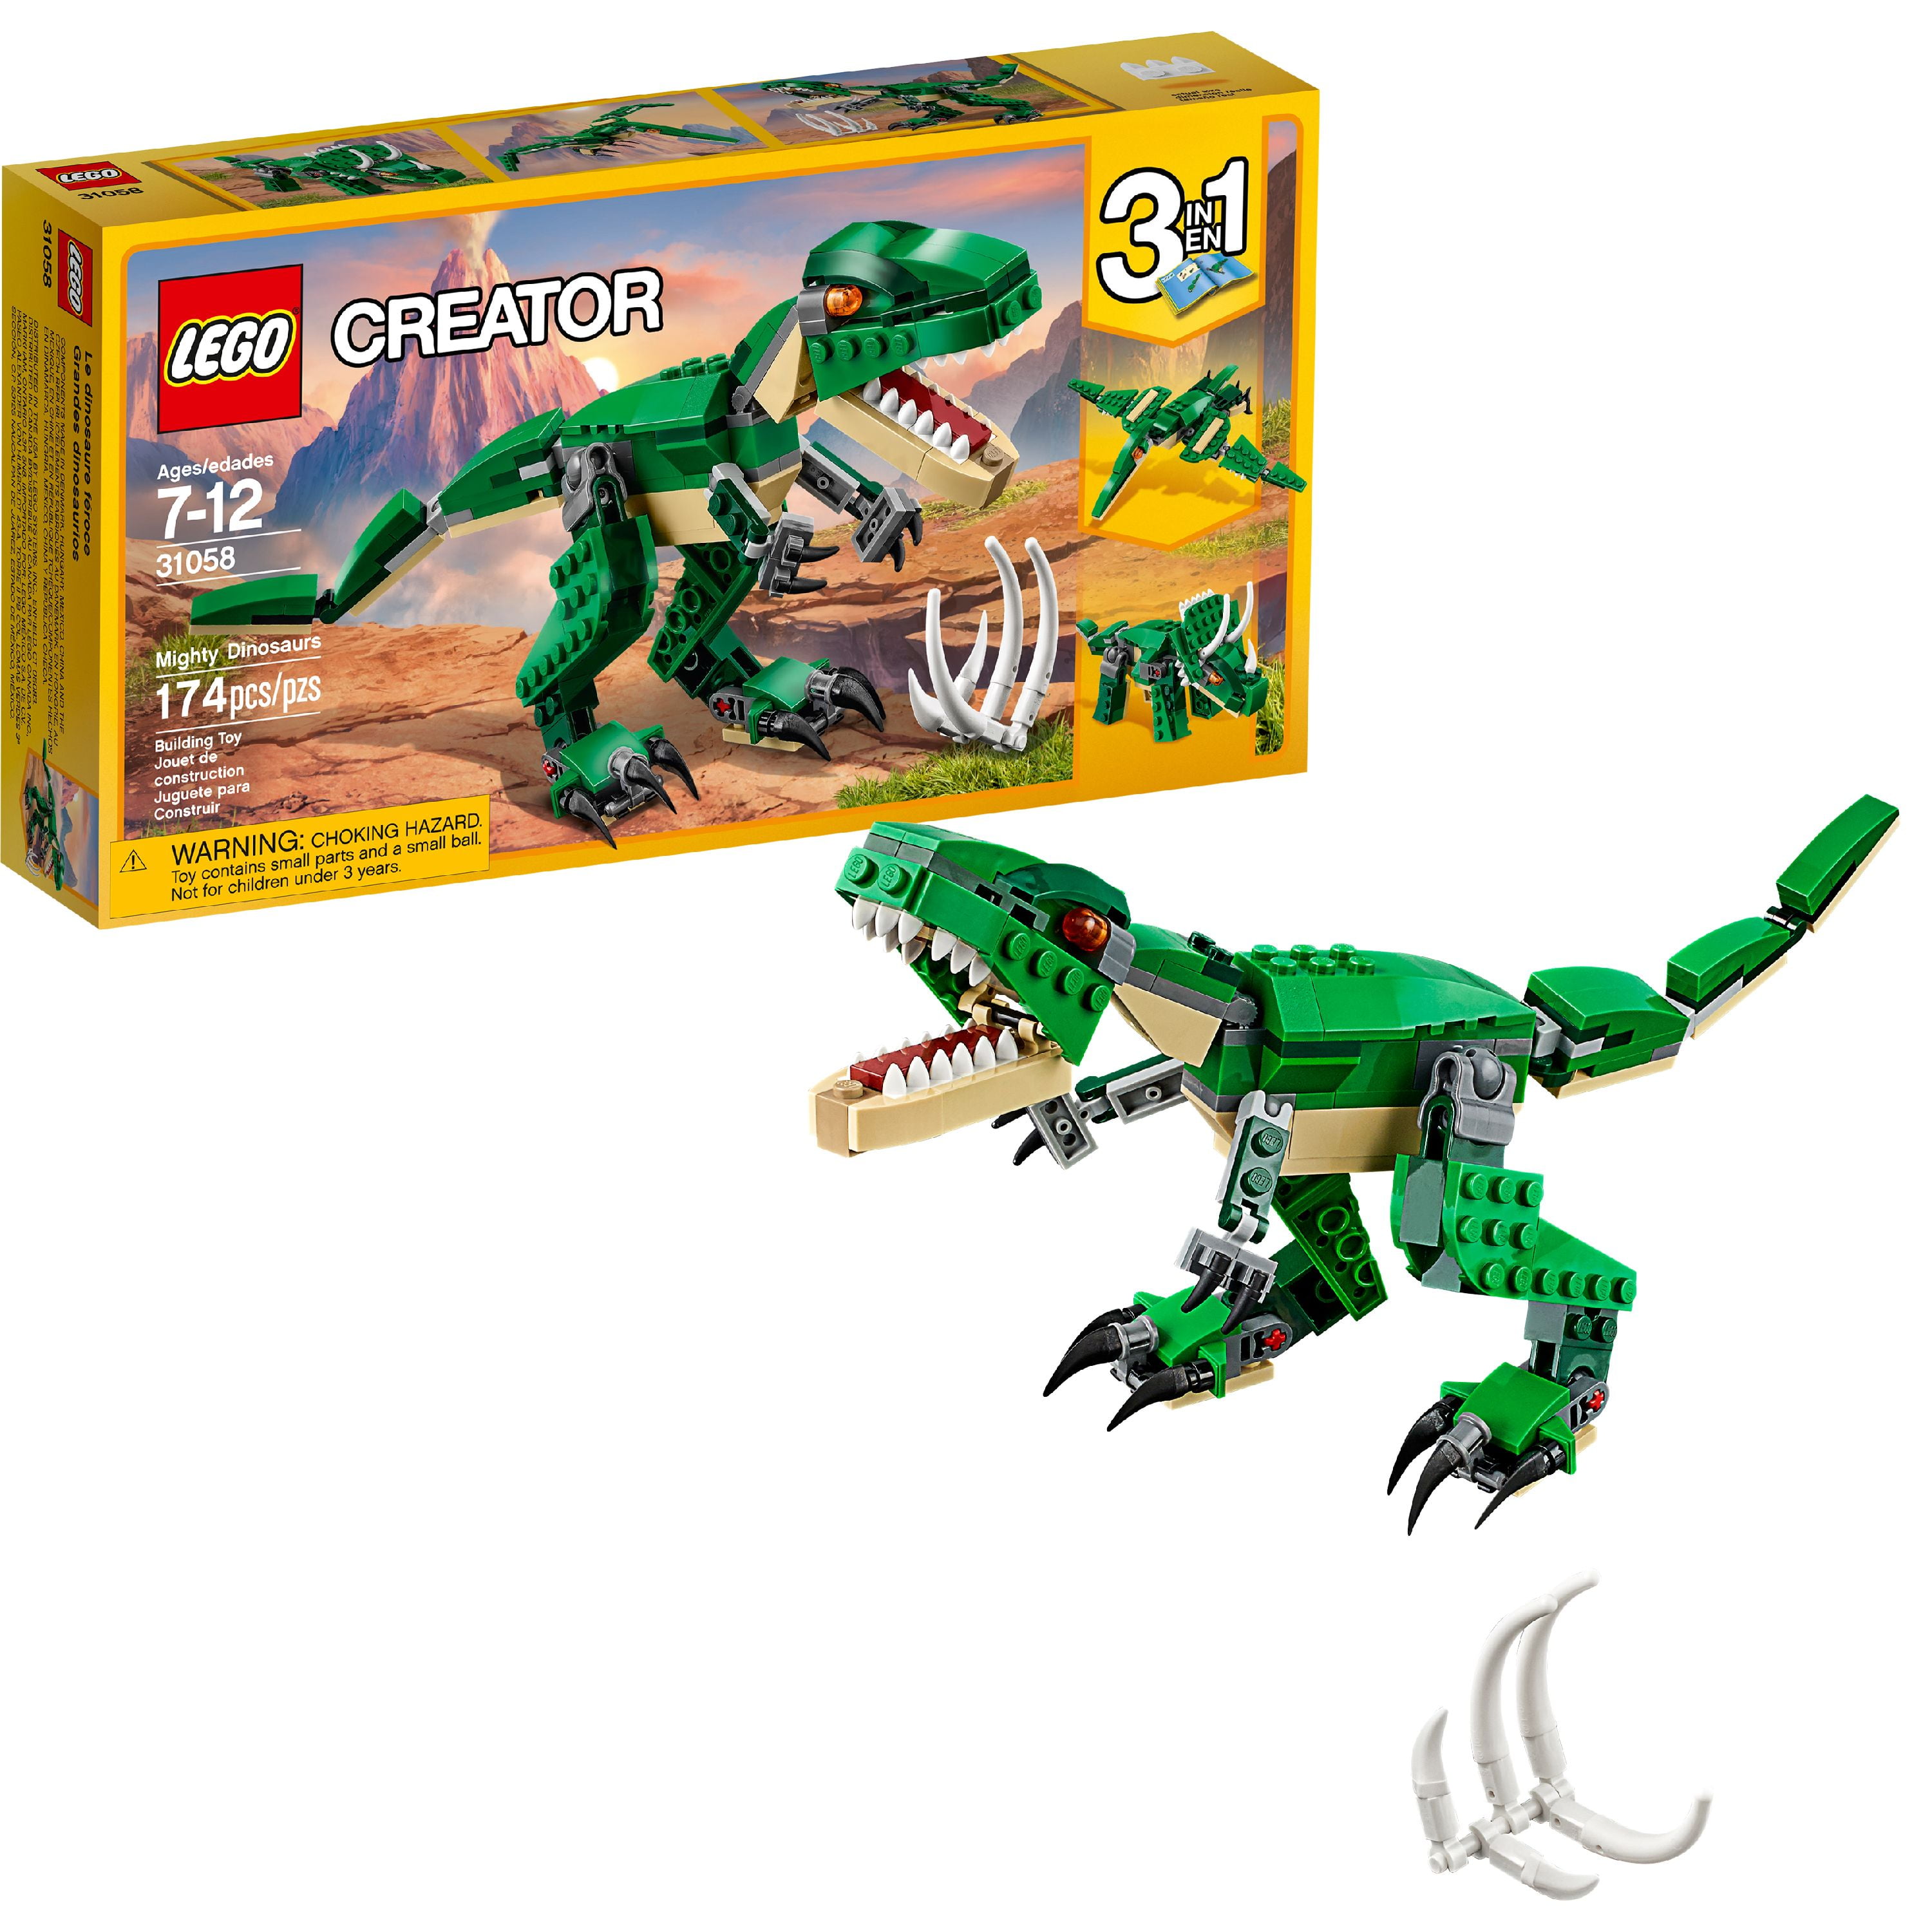 LEGO Creator Mighty Dinosaur Toy 31058, 3 in 1 Model, T. rex, Triceratops and Pterodactyl Dinosaur Figures, Gifts for 7 - 12 Year Boys & Girls - Walmart.com